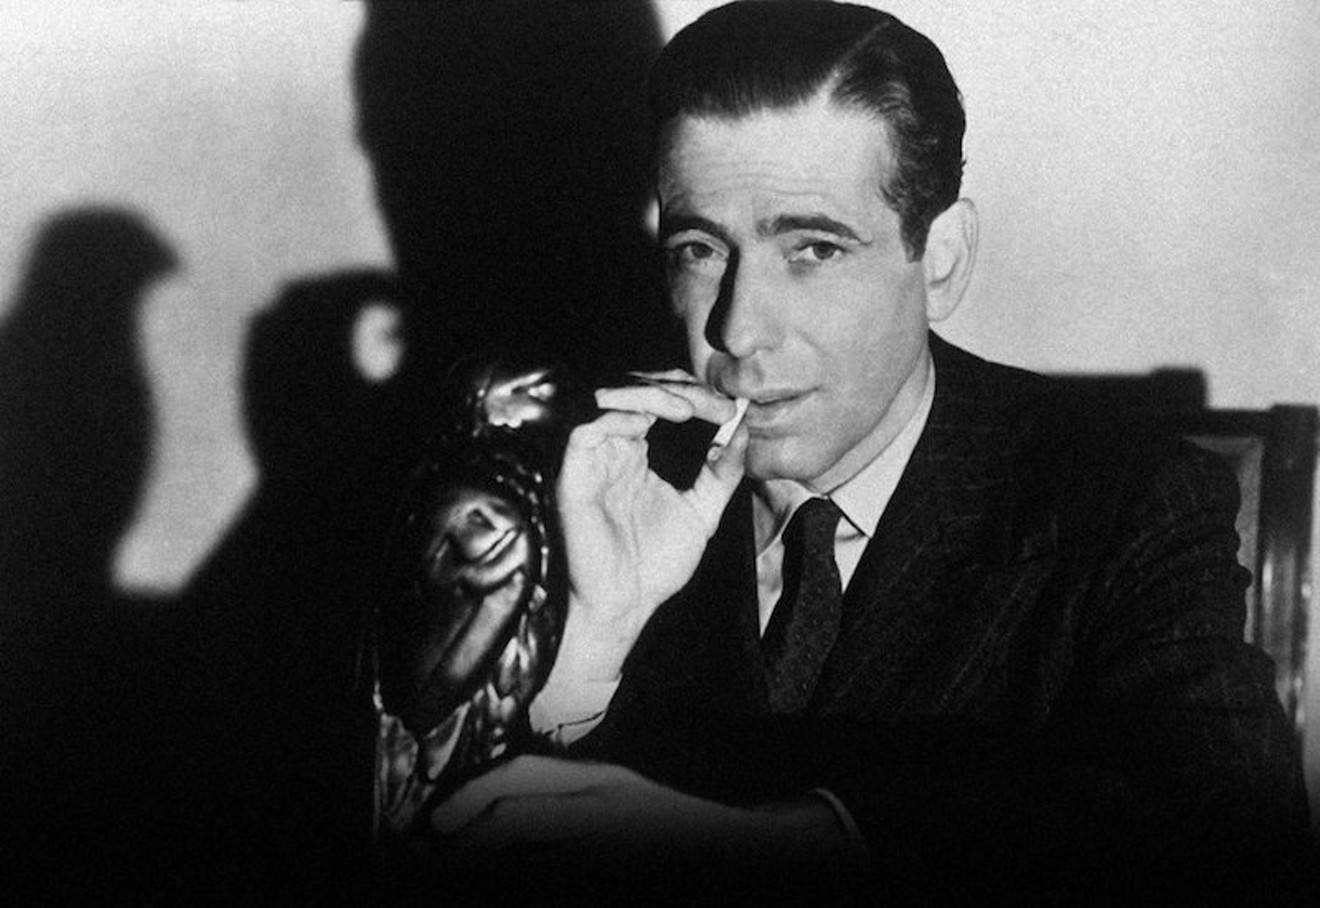 Catch a Bogart double feature on Friday, July 28, at Minturn's Blue Starlite Drive-In.